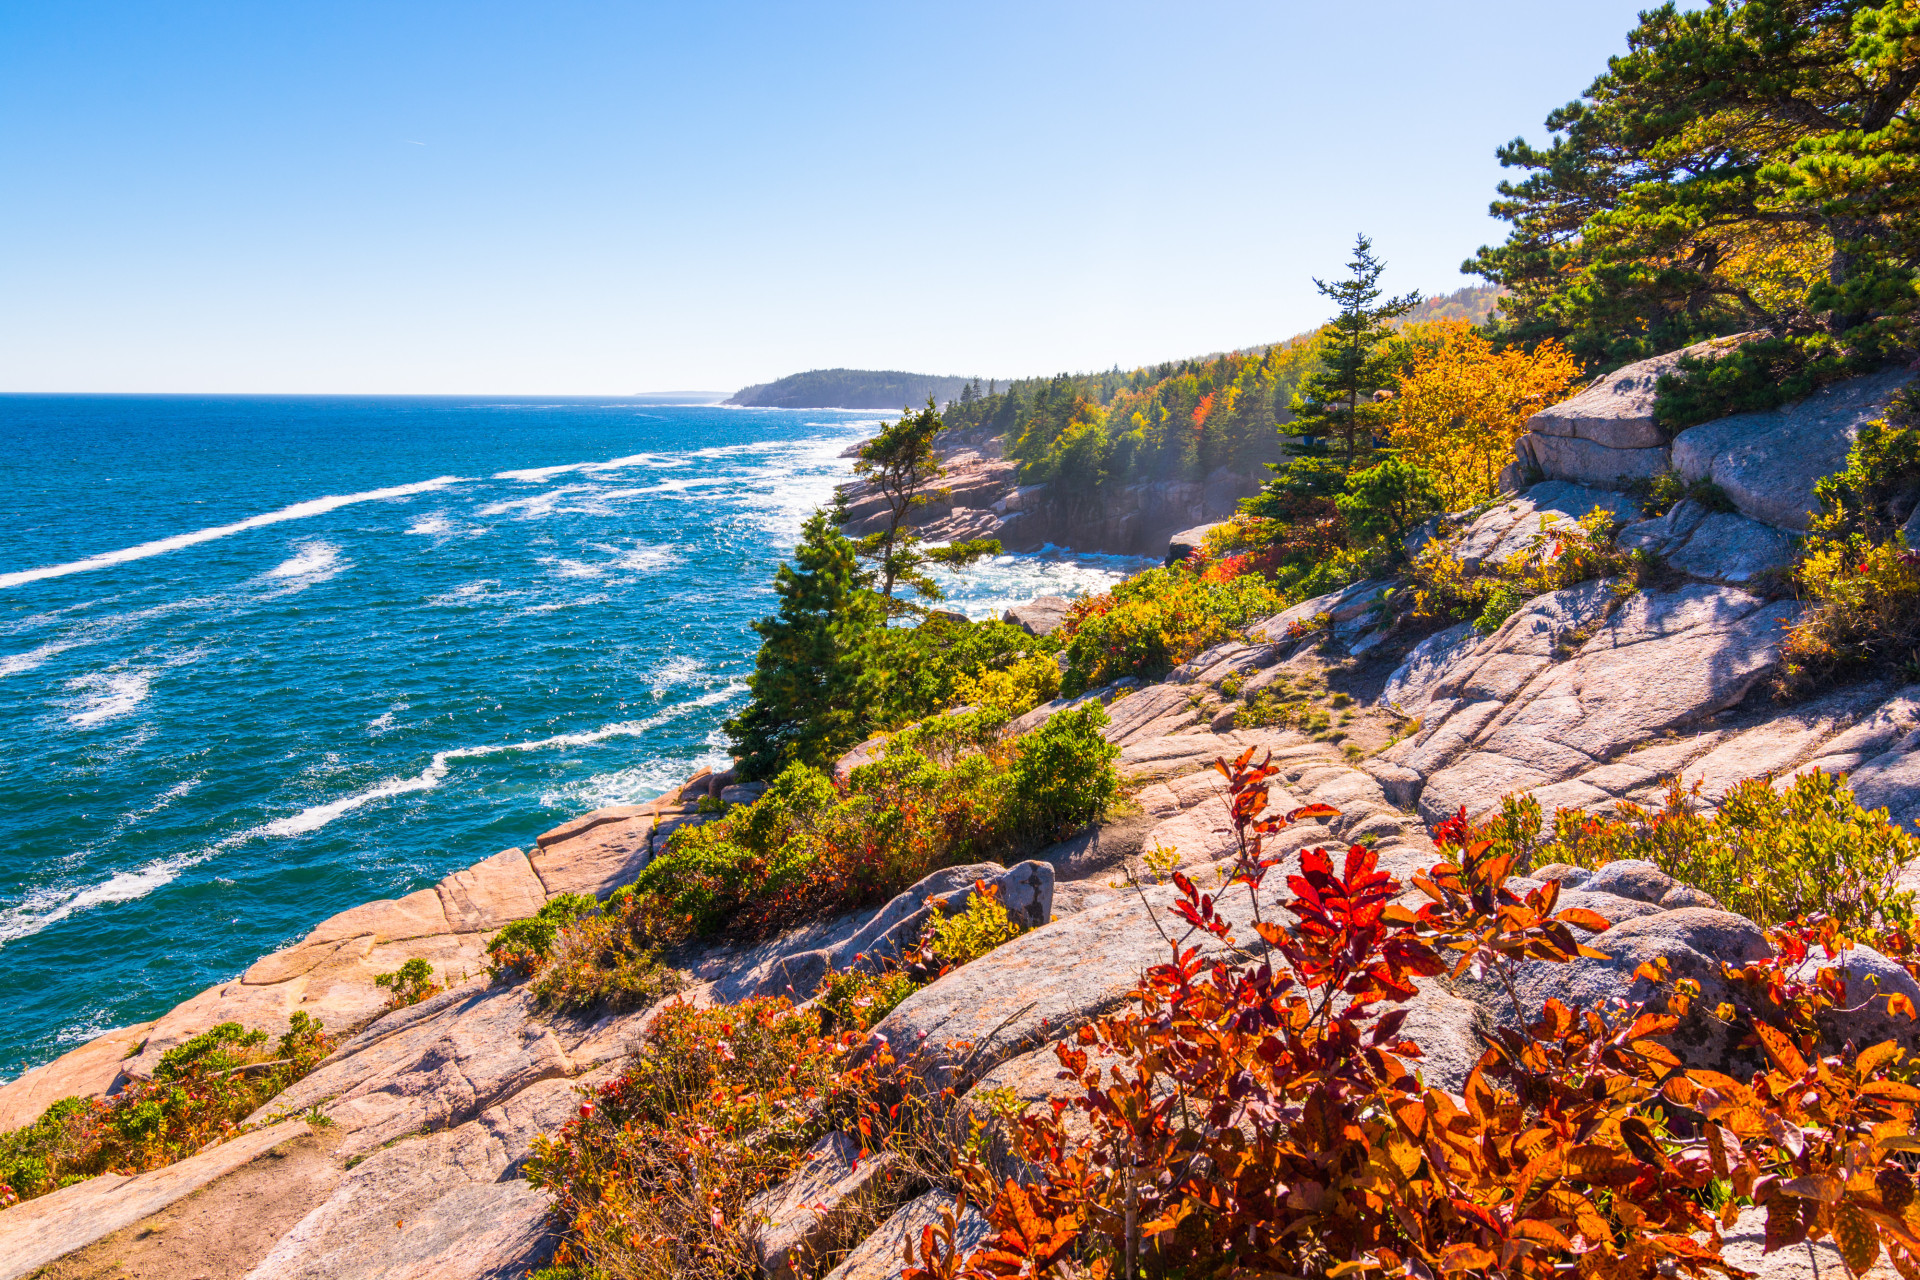 Much of the park lies on Mount Desert Island, where sea and mountain meet.